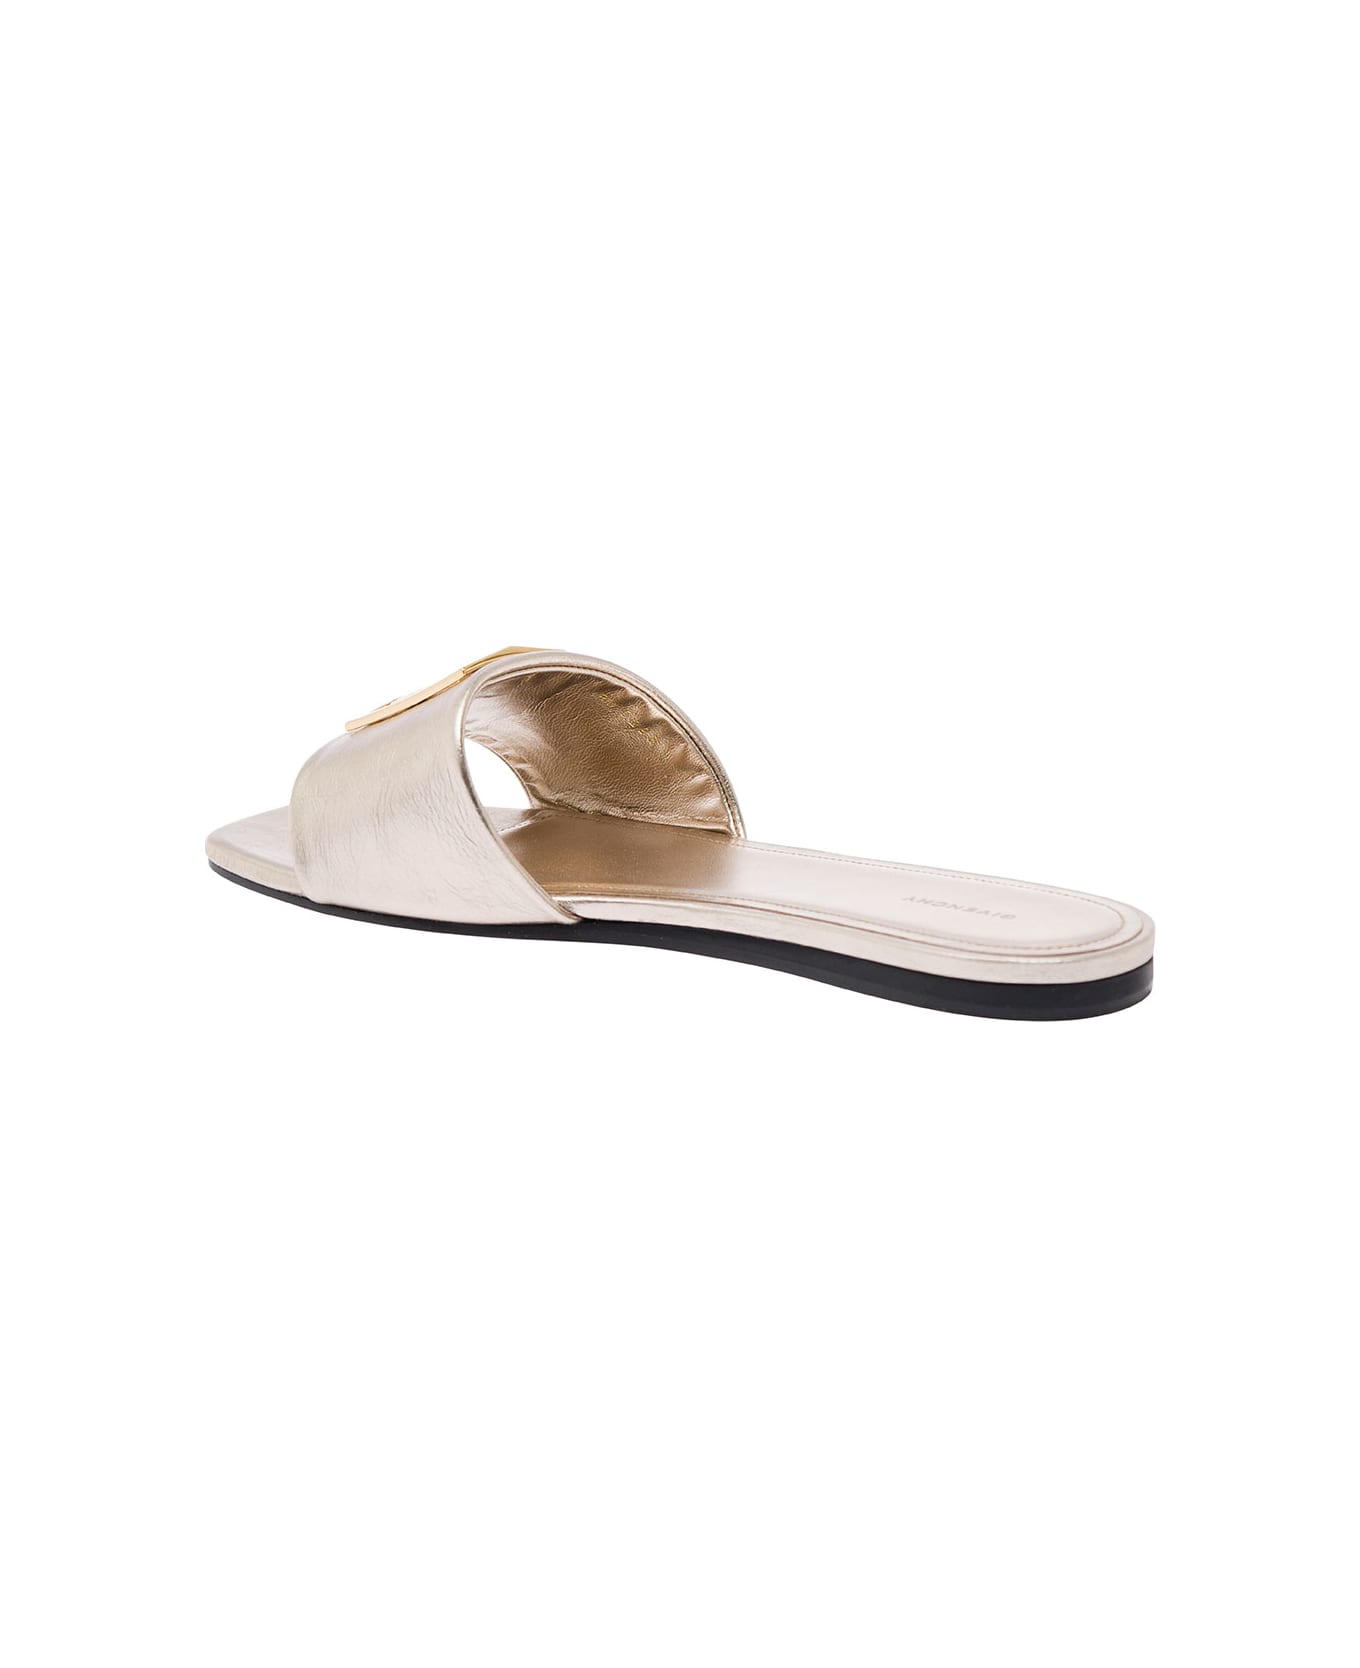 Givenchy Silver Flat Sandals With 4g Detail In Metallic Leather Woman - DUSTY GOLD サンダル